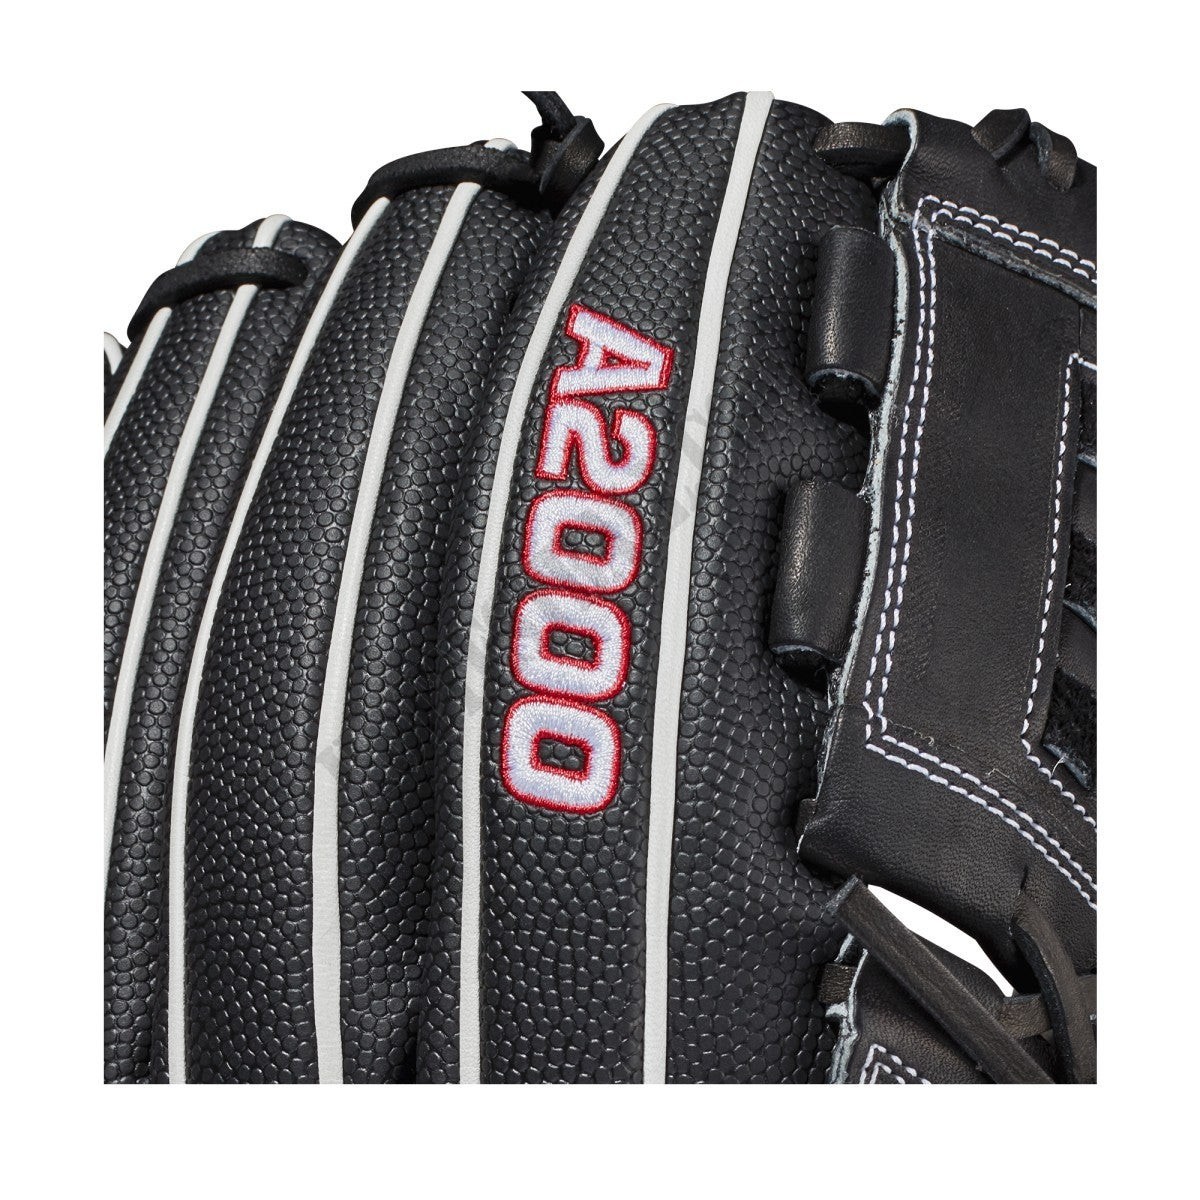 2021 A2000 P12SS 12" Pitcher's Faspitch Glove ● Wilson Promotions - -6